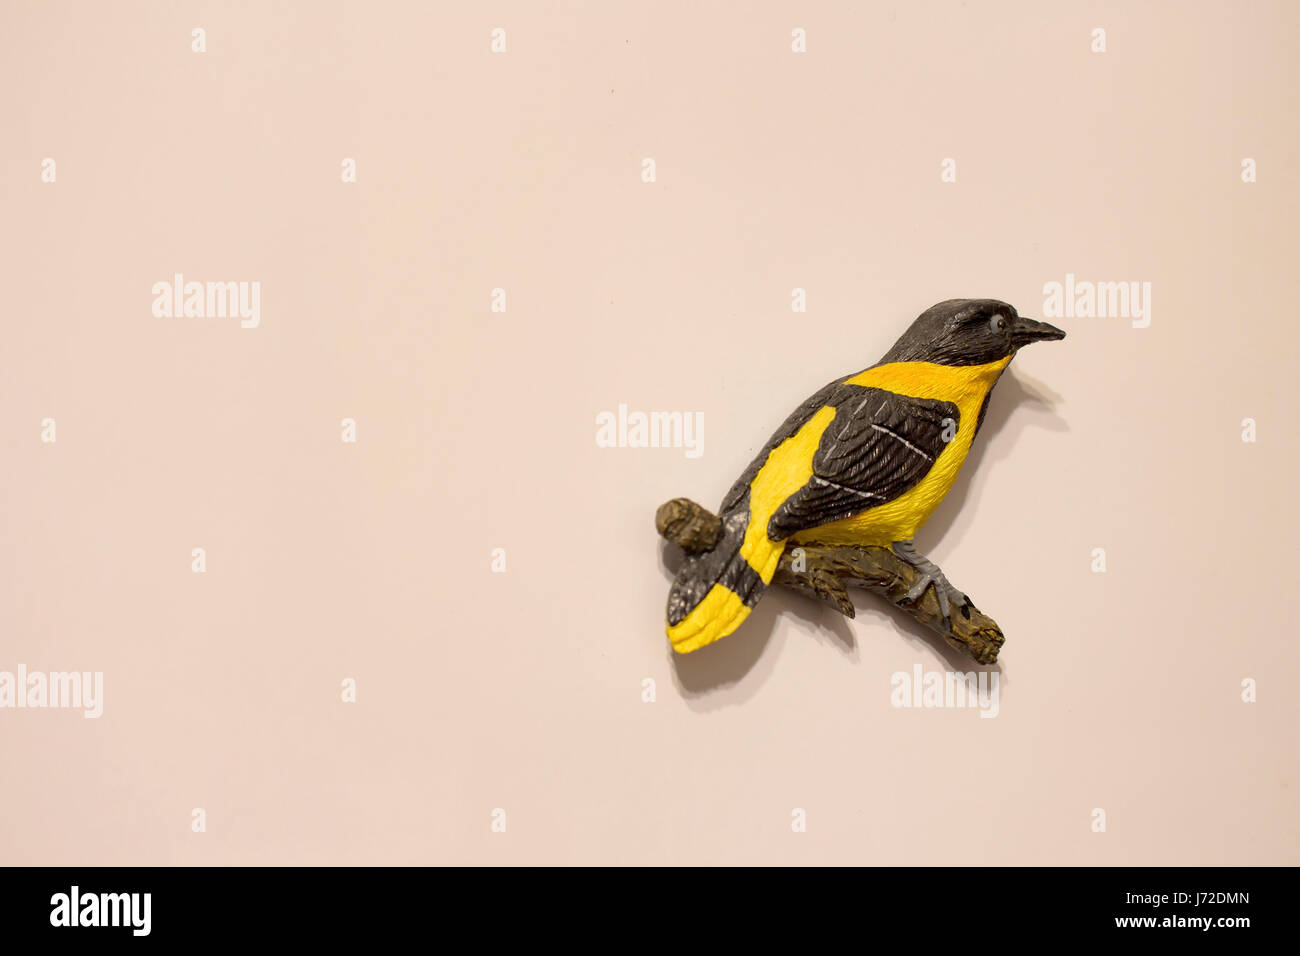 Close up view of isolated magnet (souvenir) shaped of bird on a branch on beige background. Stock Photo